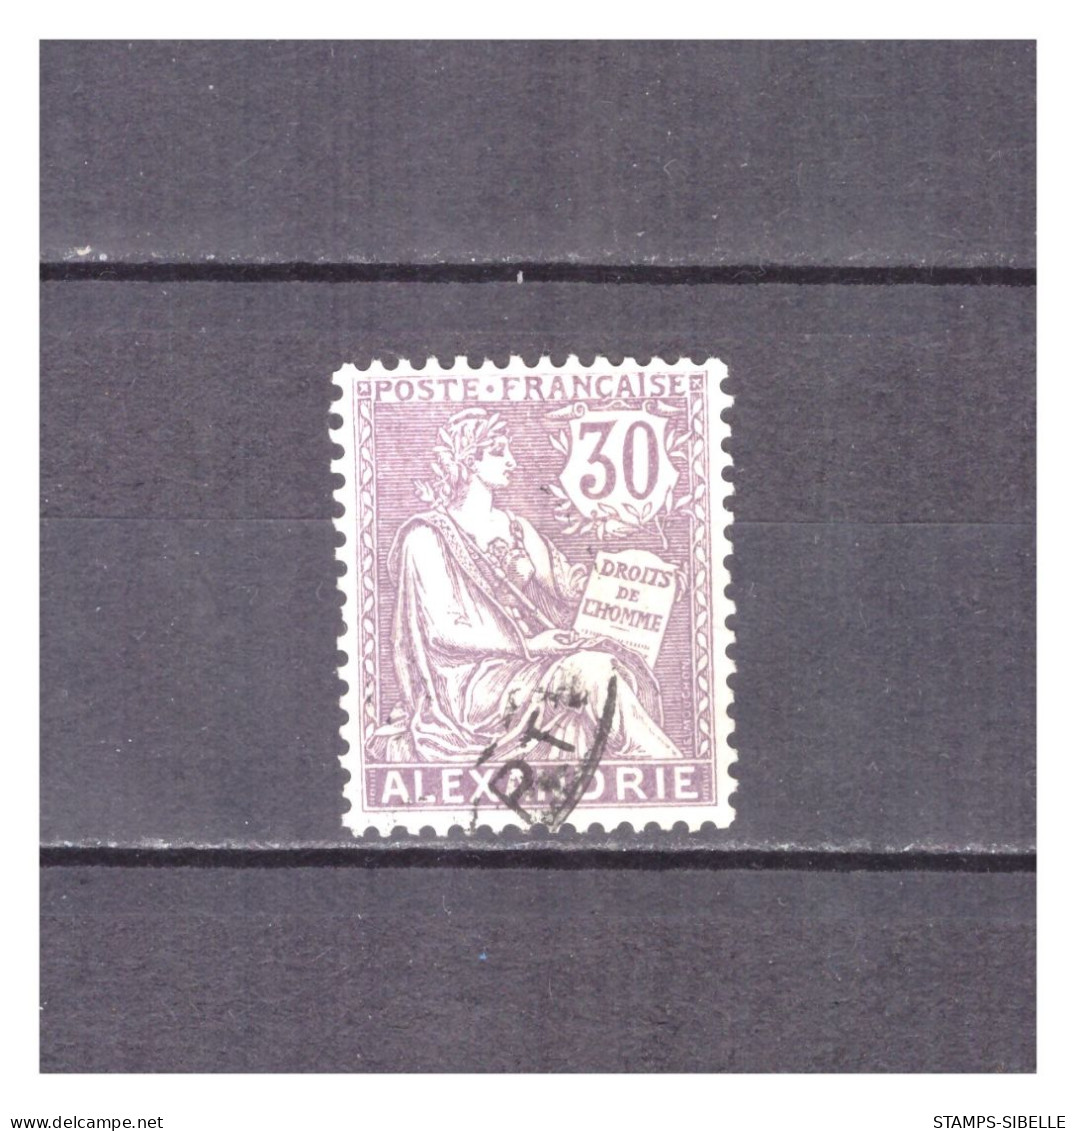 ALEXANDRIE  N °  28  .  30 C  OBLITERE   .  SUPERBE  . - Used Stamps